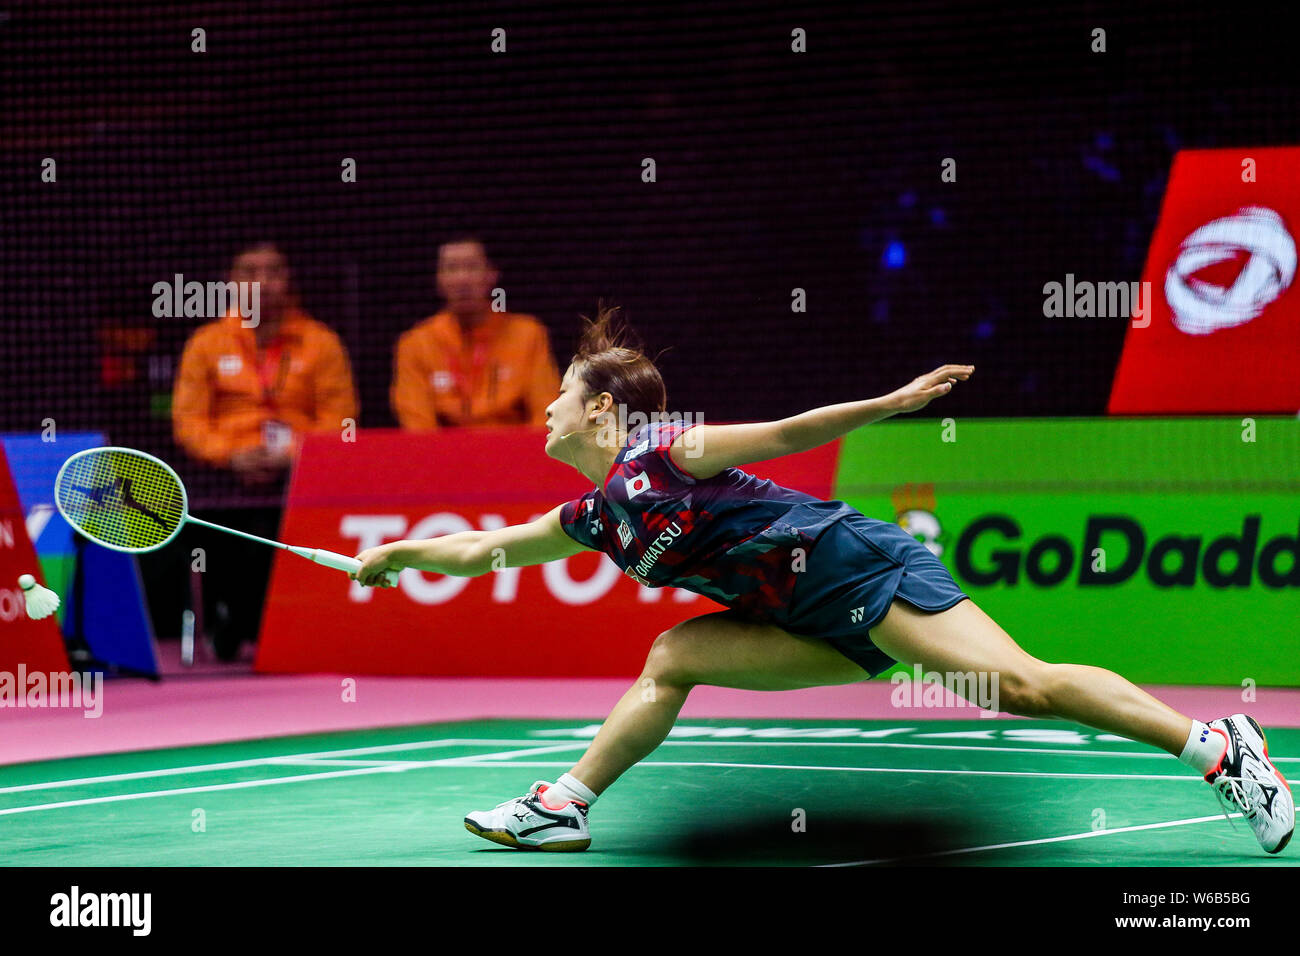 Nozomi Okuhara of Japan competes against Michelle Li of Canada in their womens singles of the Group A match during the TOTAL BWF Thomas and Uber Cup Fi Stock Photo